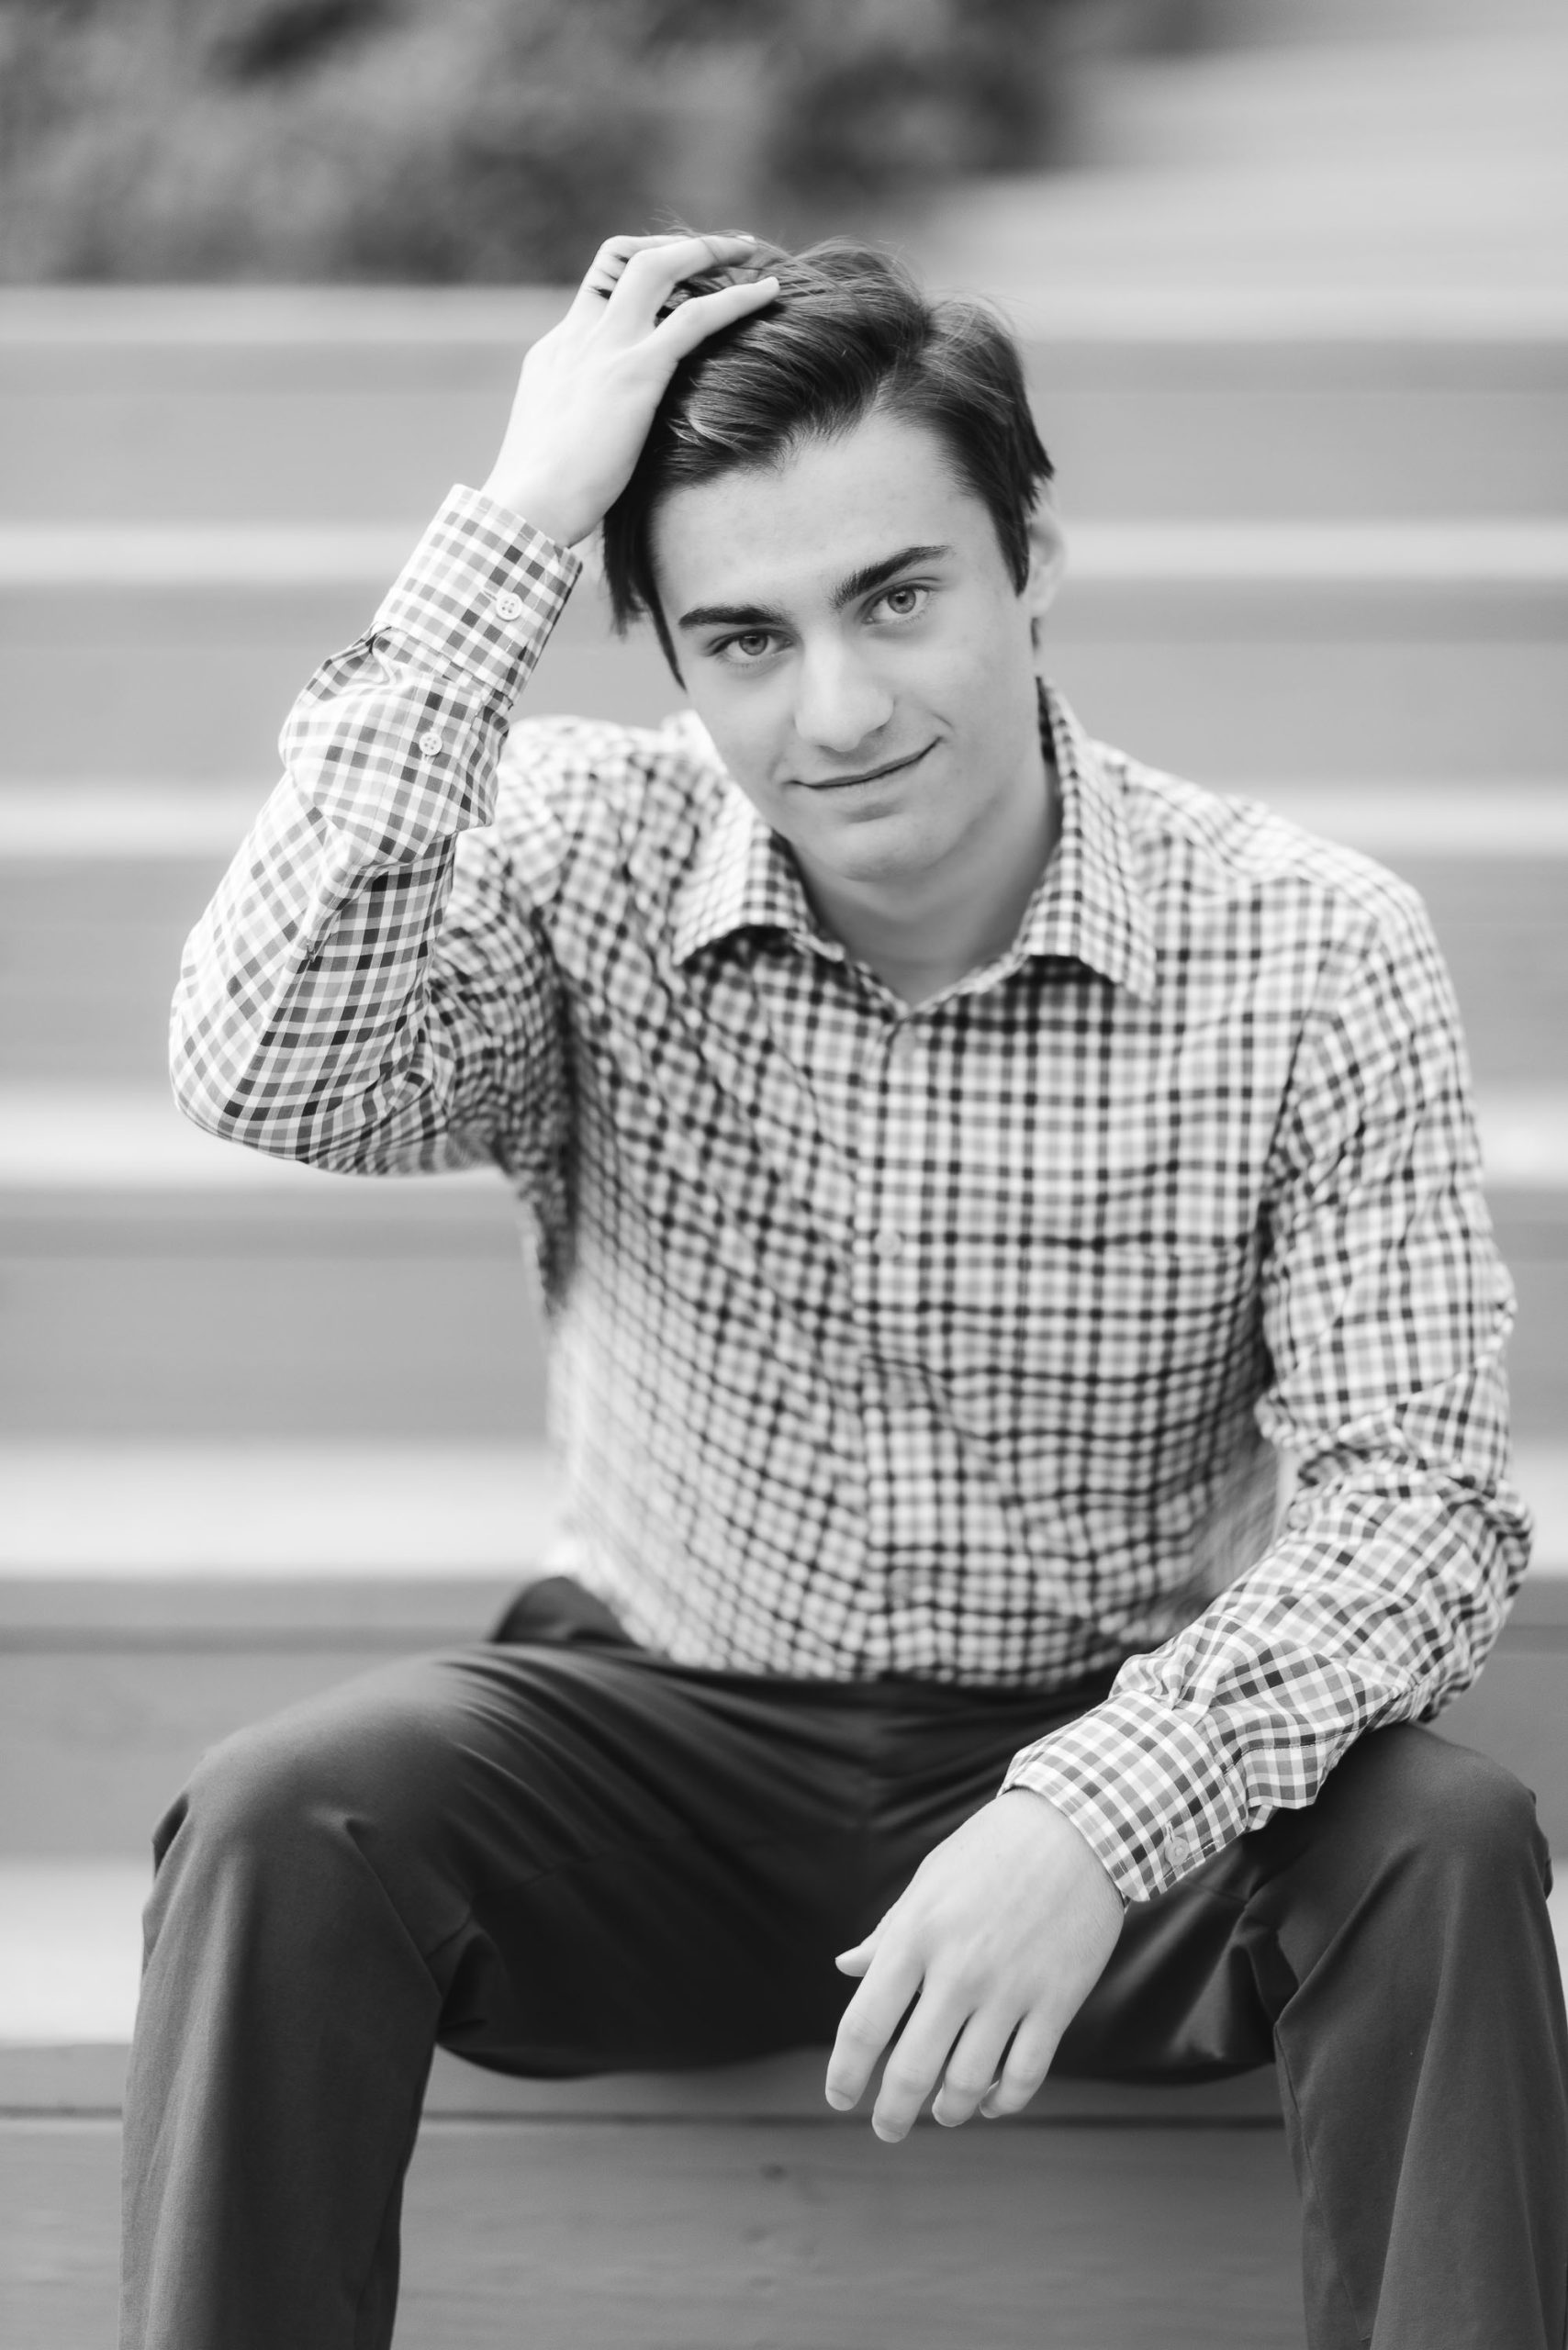 A black and white graduation portrait of a young man sitting on steps.